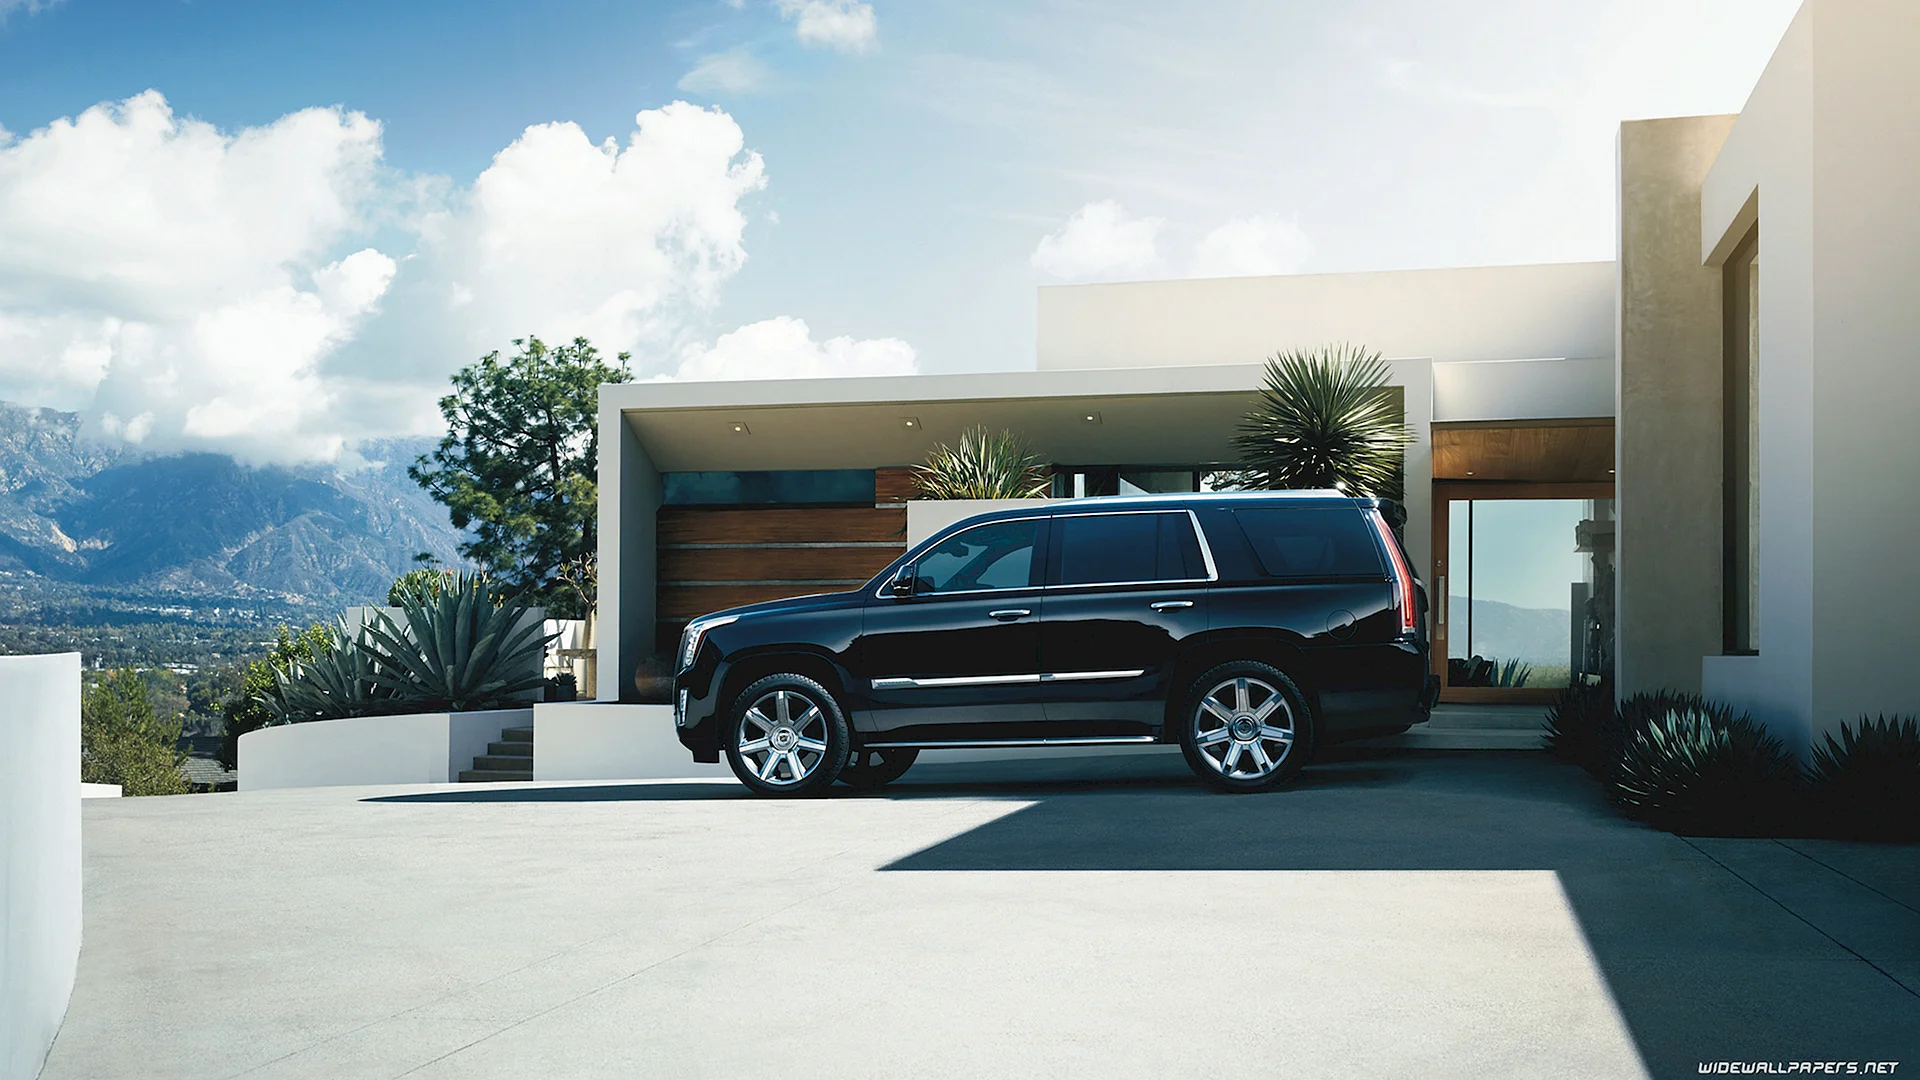 Cadillac Escalade SUV SUV 4 large Suitcase 3 carry-on Wallpaper